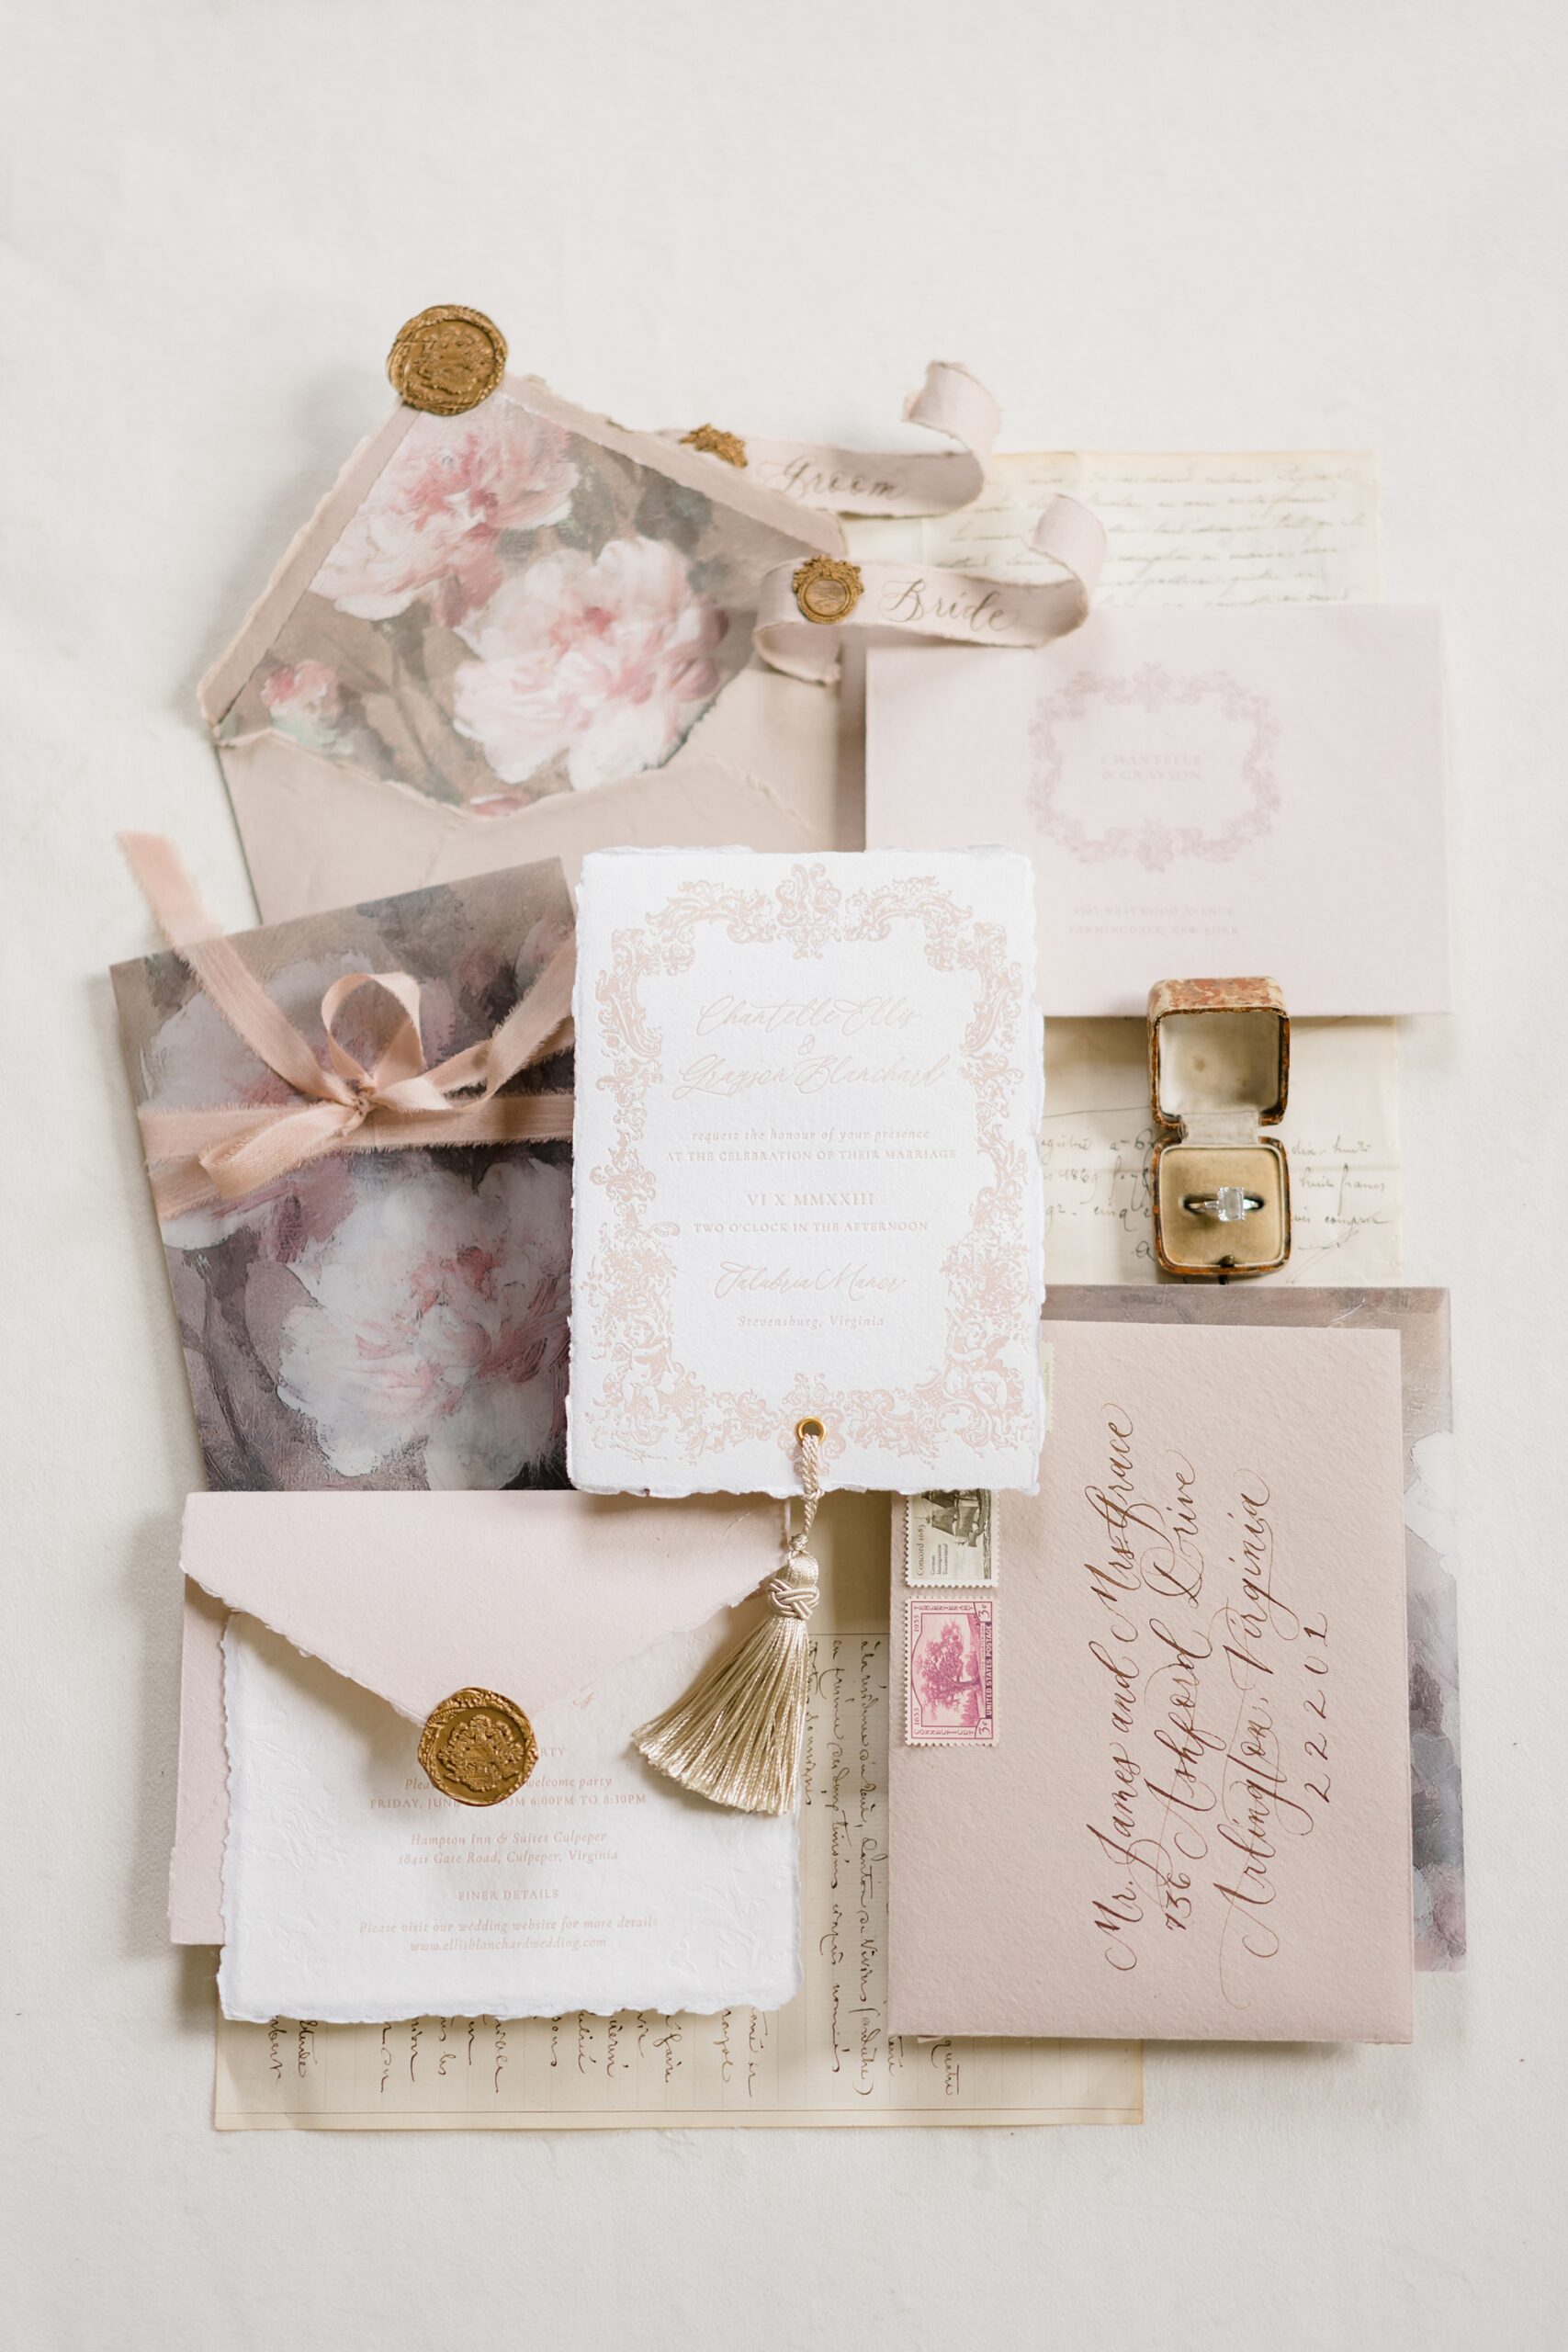 wedding invitations and details from Historic Salubria Wedding in Virginia